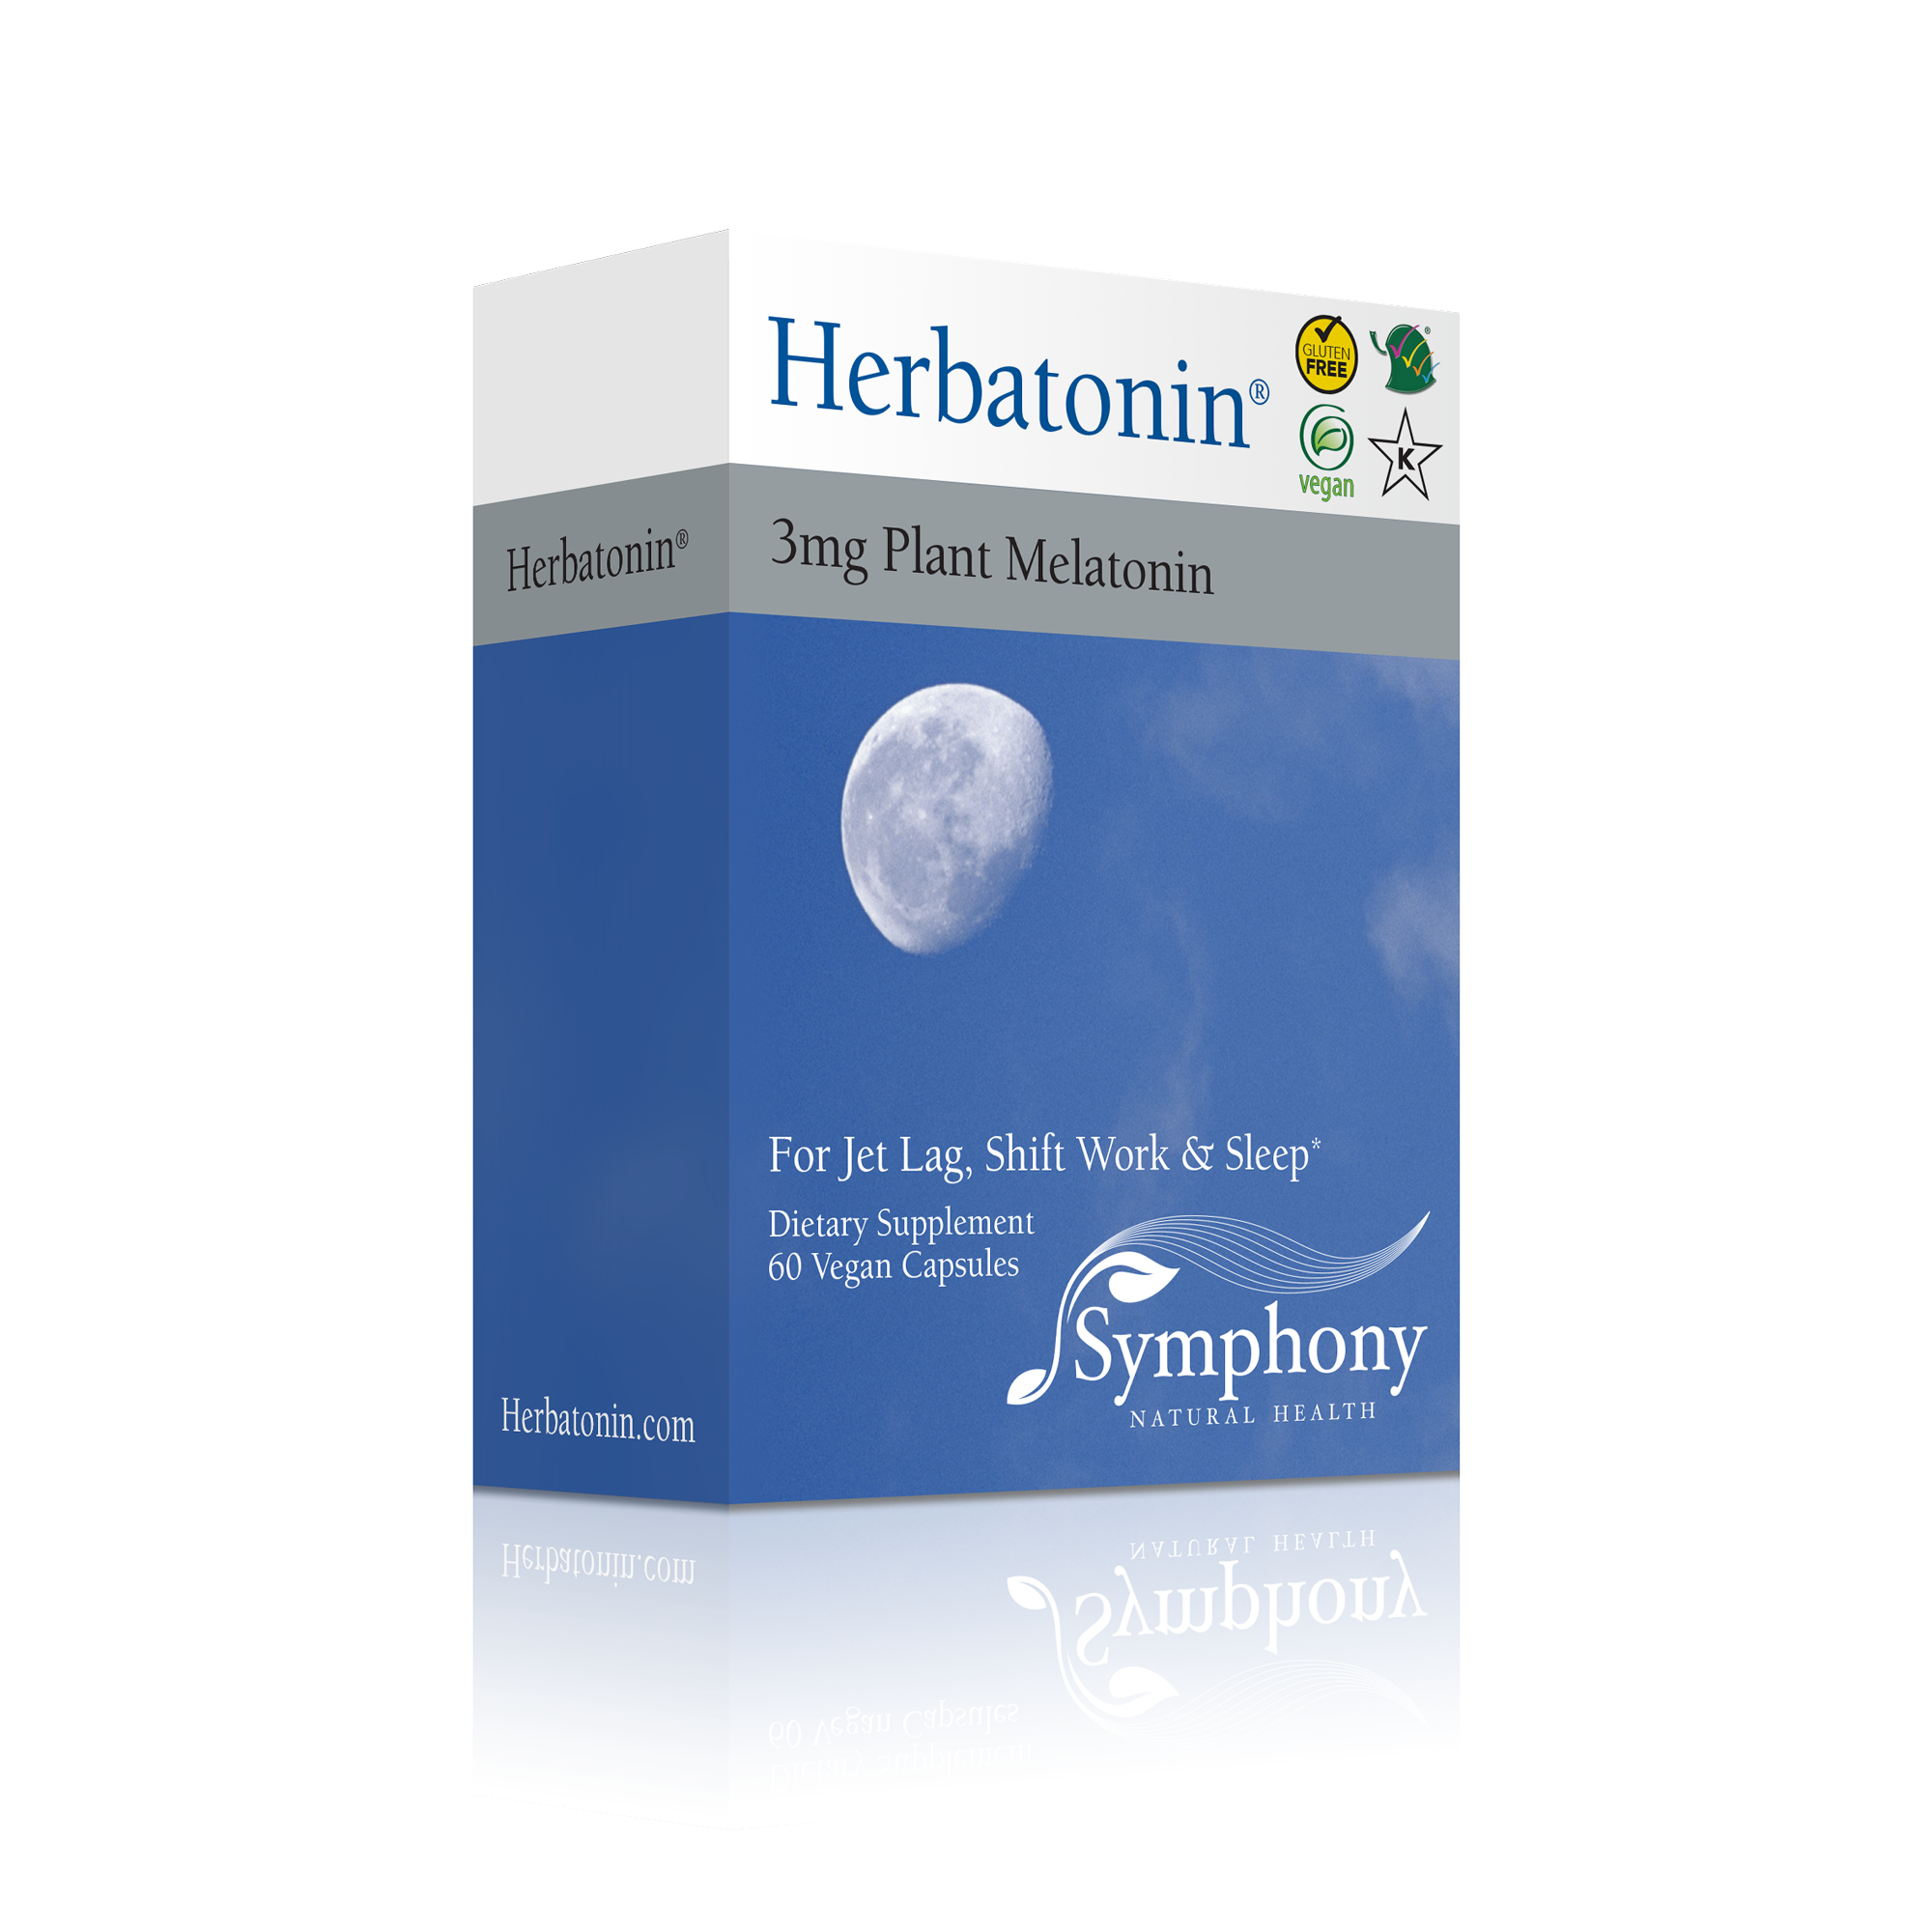 Herbatonin 3mg right-facing front and side of product box Herbatonin blue logo on black background, moon in daylight blue sky and clouds, gluten free, vegan and Kosher logos, symphony logo